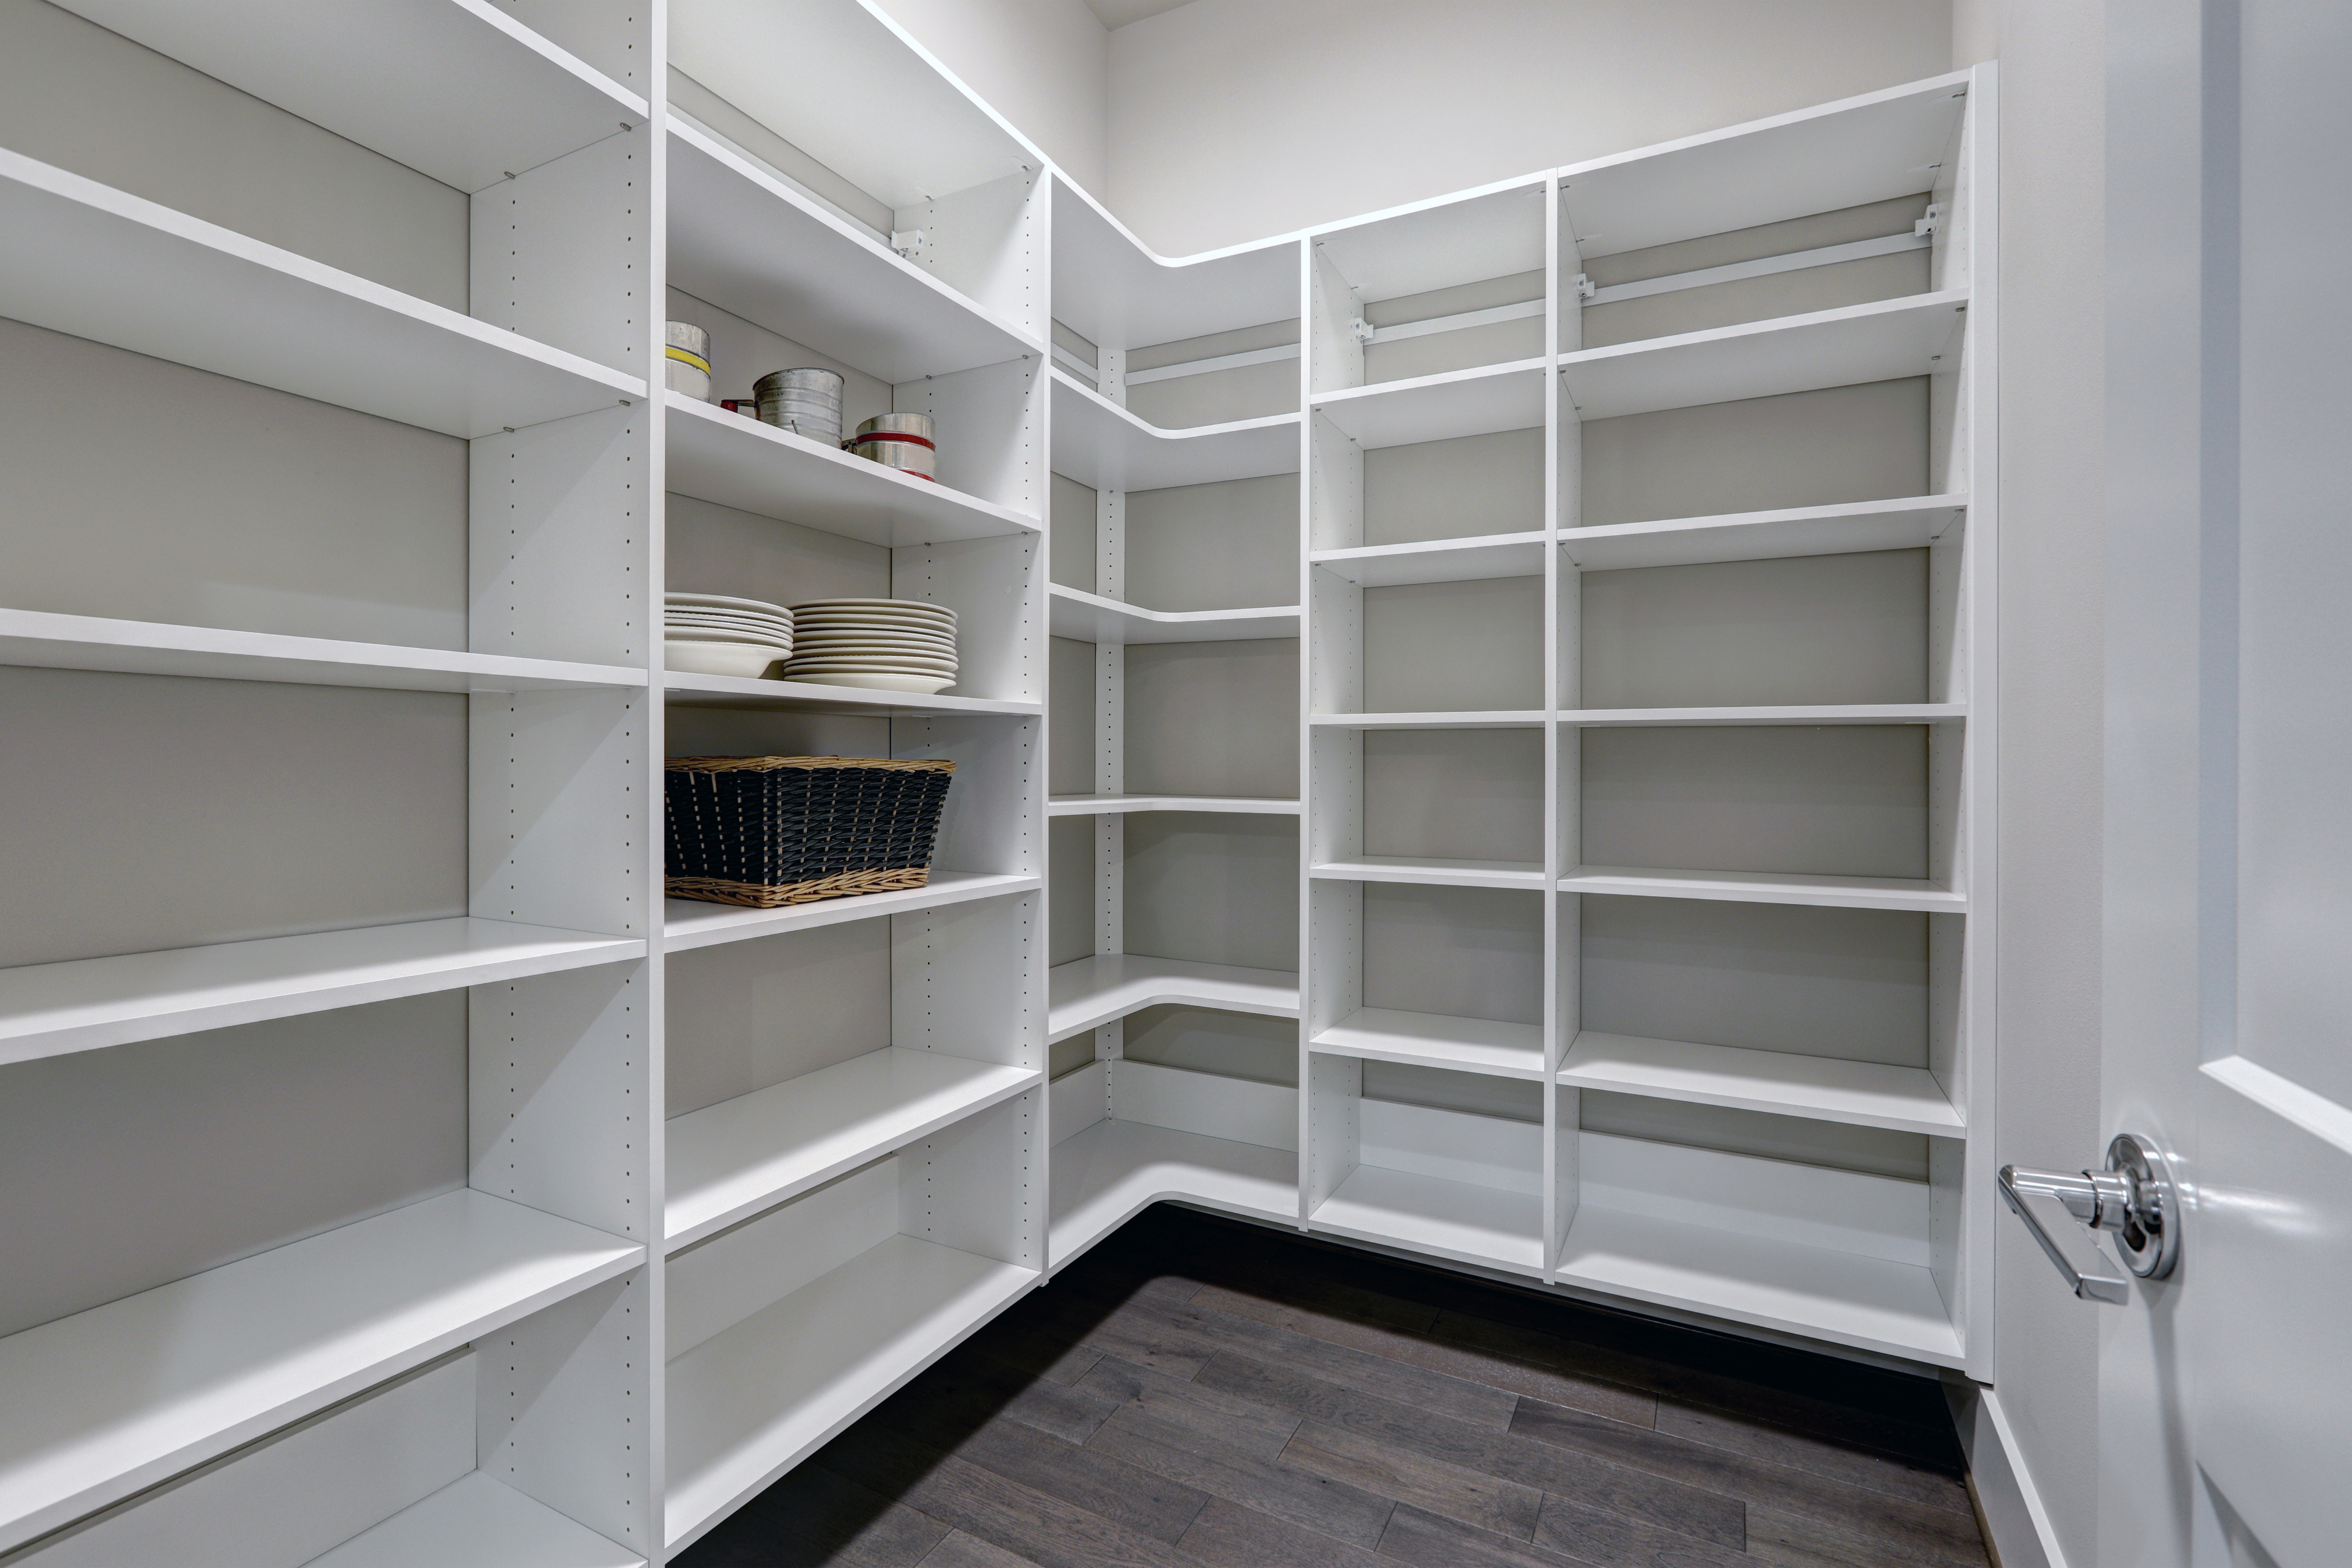 How To Choose The Best Corner Shelves For Your Closet - Featured Image